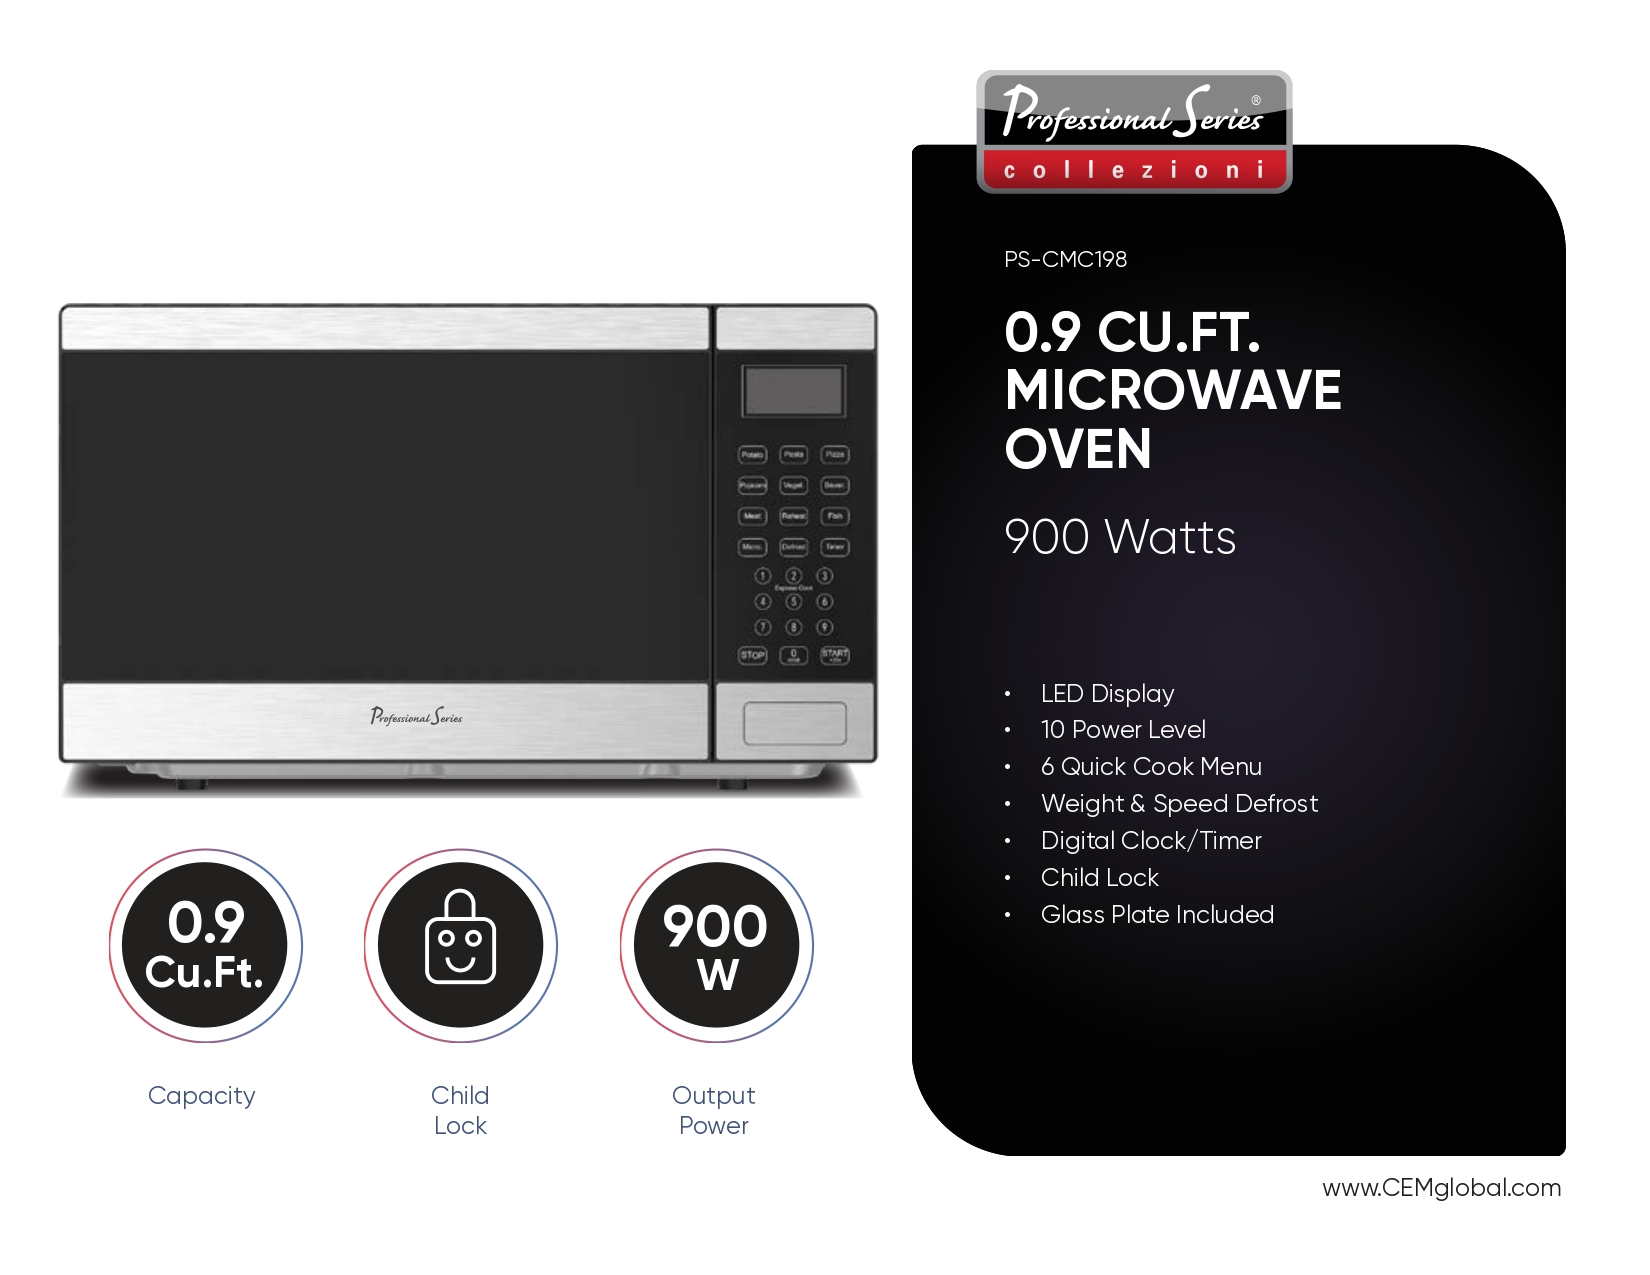 0.9 CU.FT. MICROWAVE OVEN